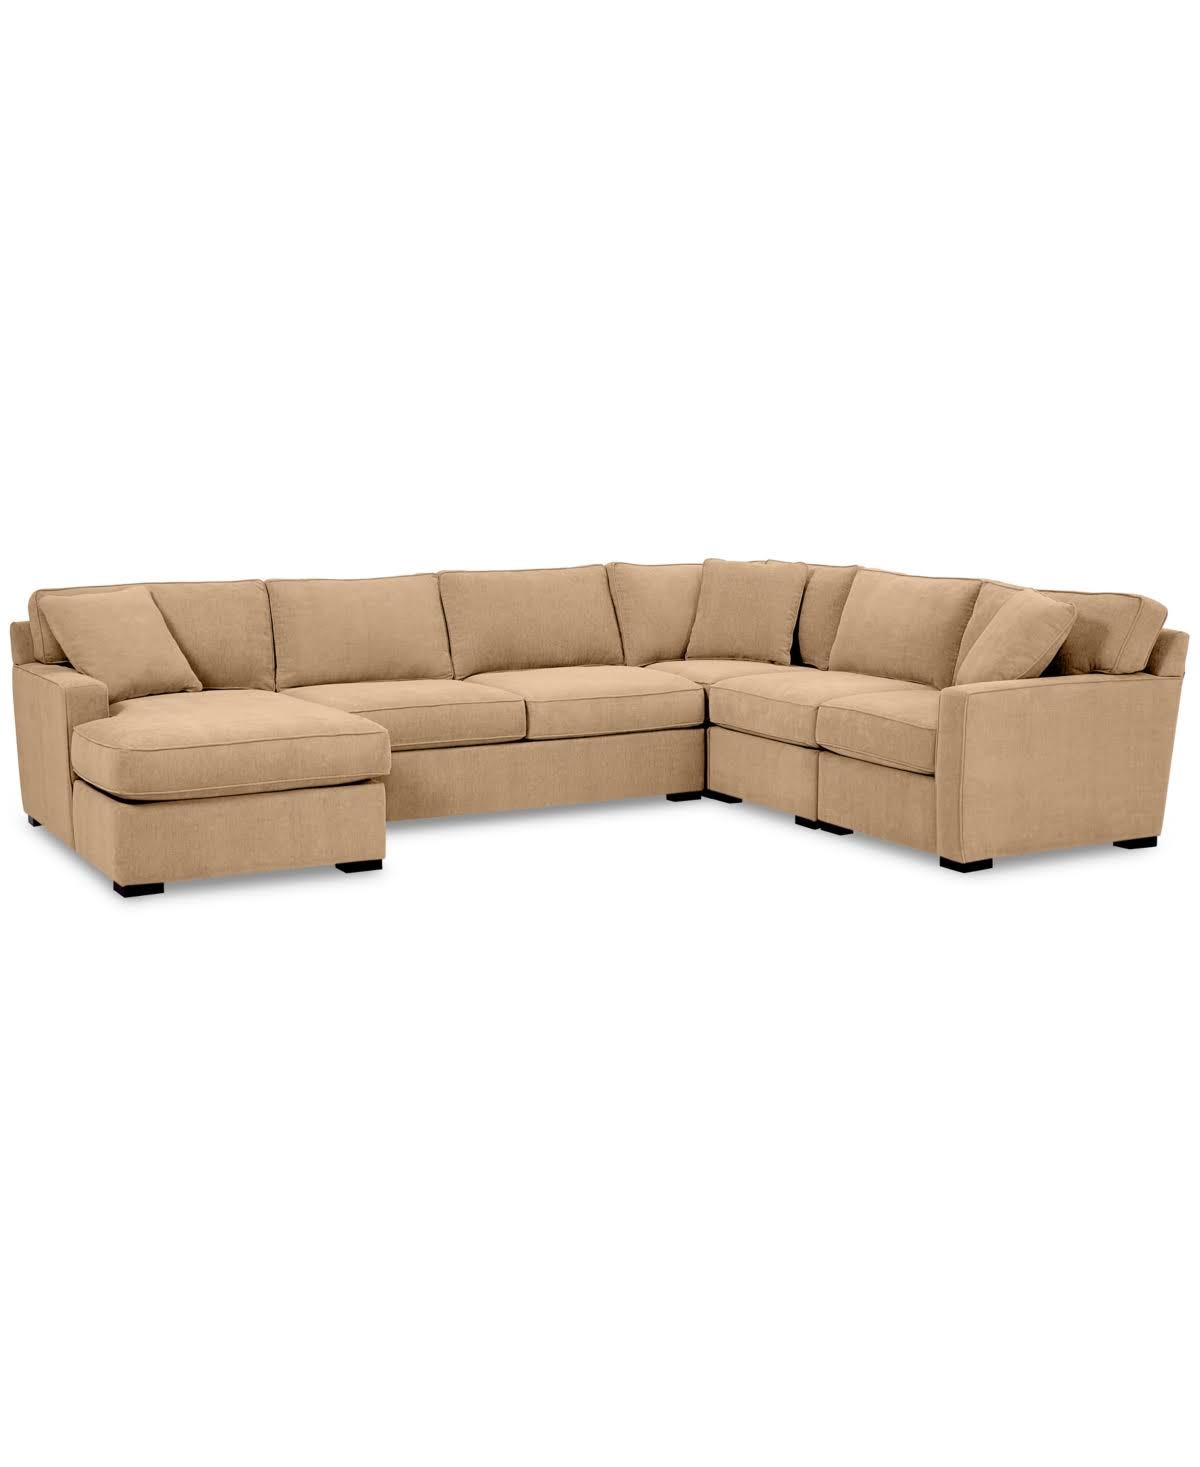 Heavenly Caramel 5-Pc. Textural Chaise Sectional Sofa for Stylish Comfort | Image